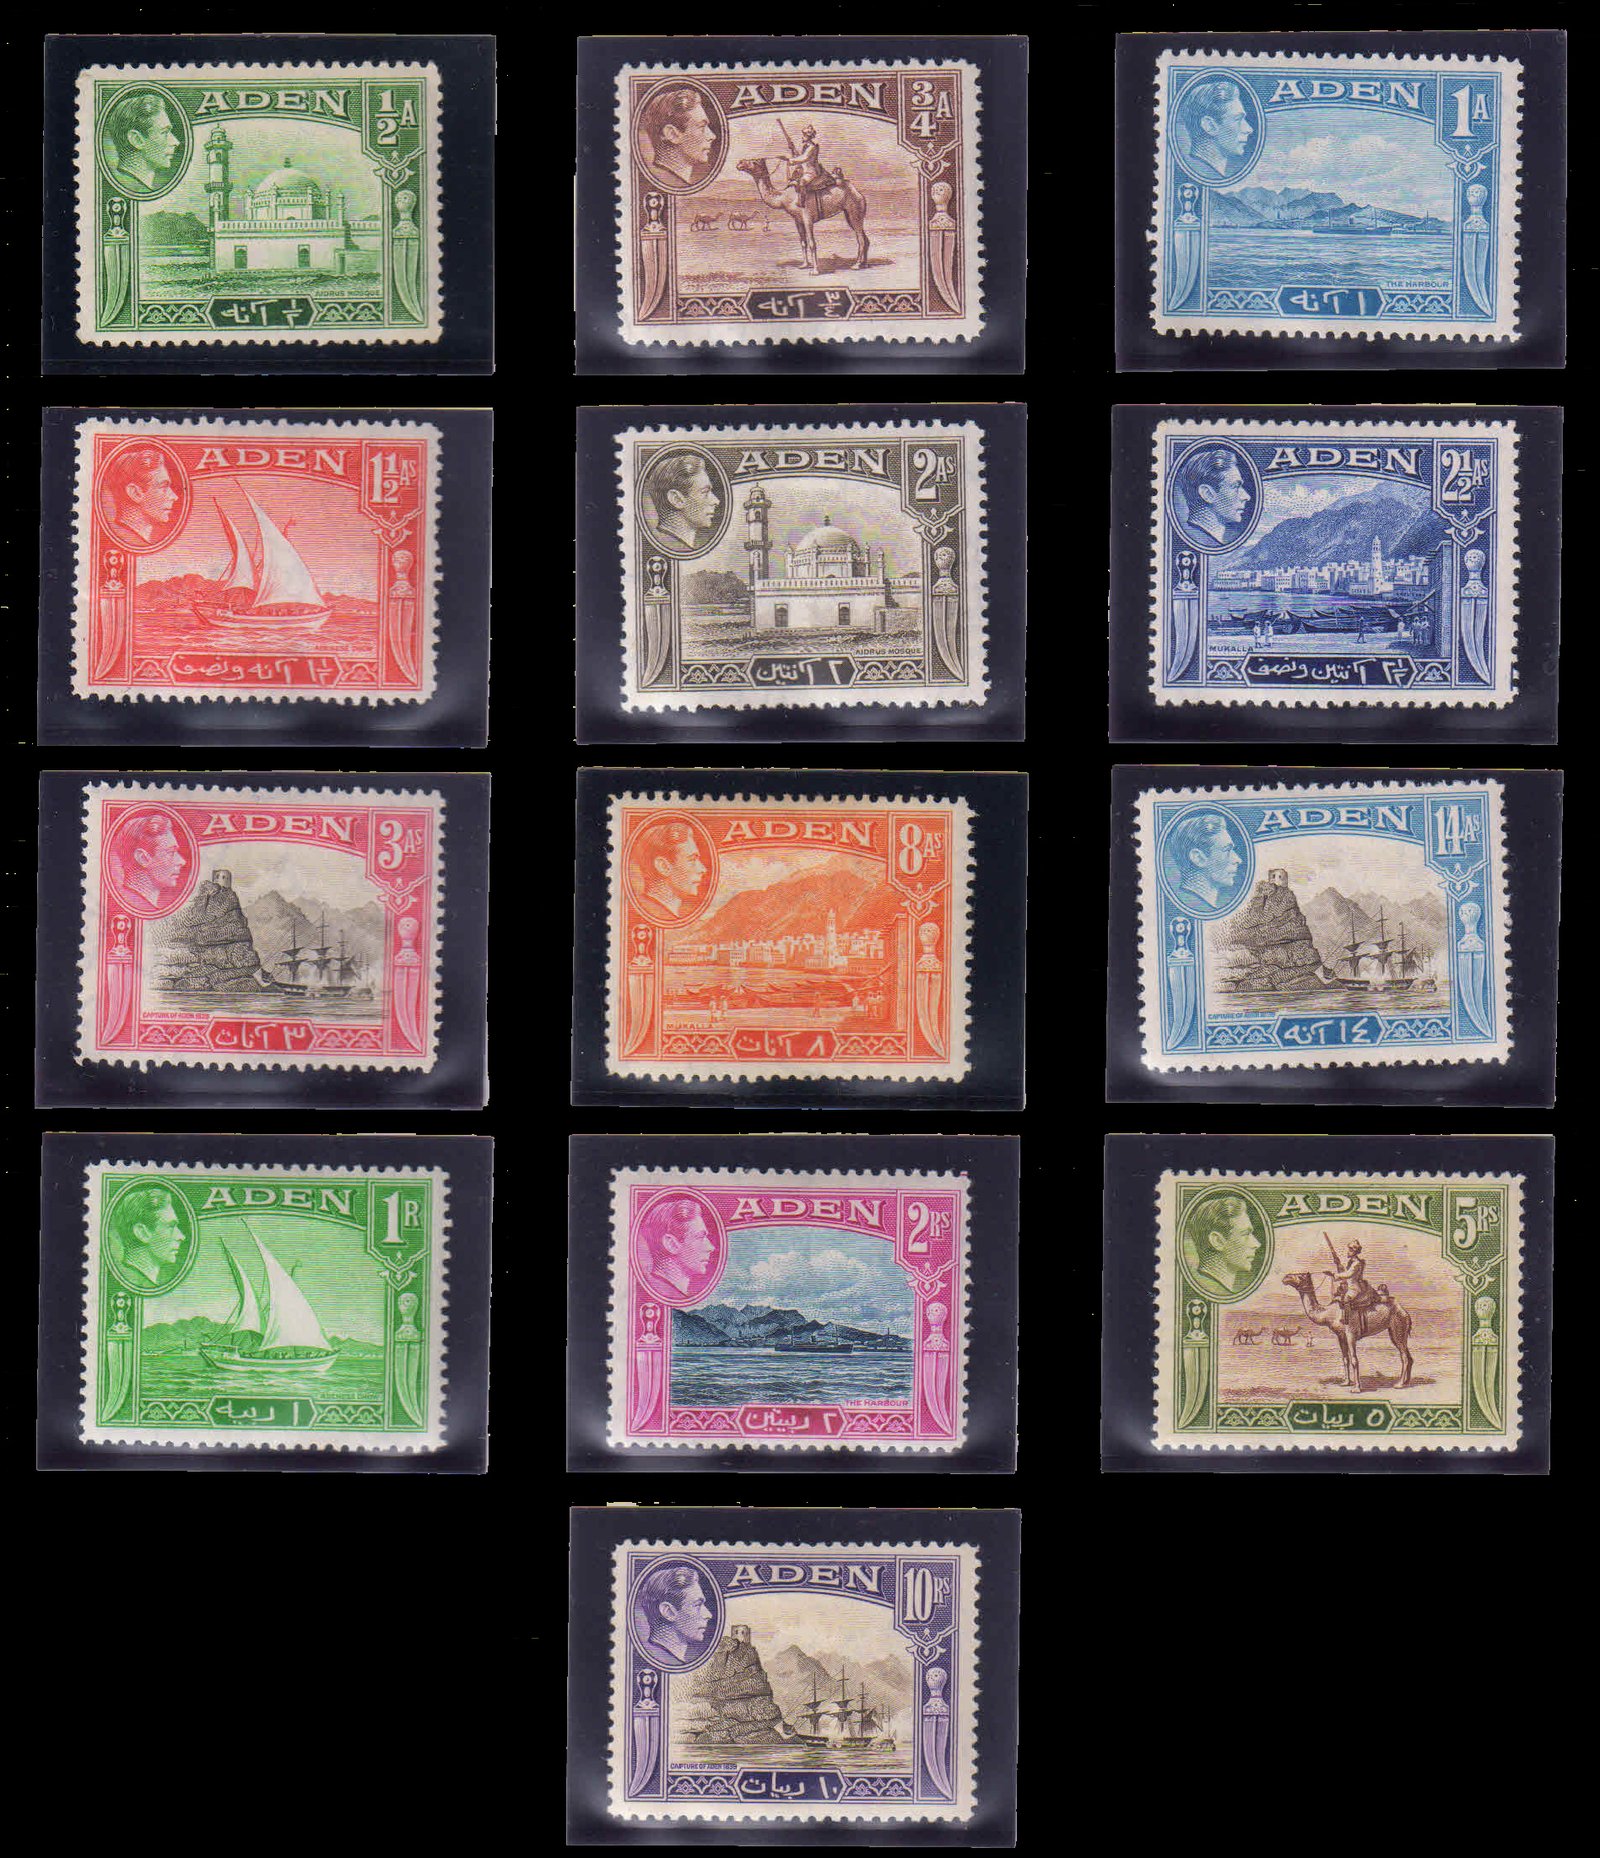 ADEN 1939-King George VI, Thematic Pictorial Series, Camel, Mosque, Forts, Set of 13-Mint Hinged, Cat £ 135-S.G. 16-27